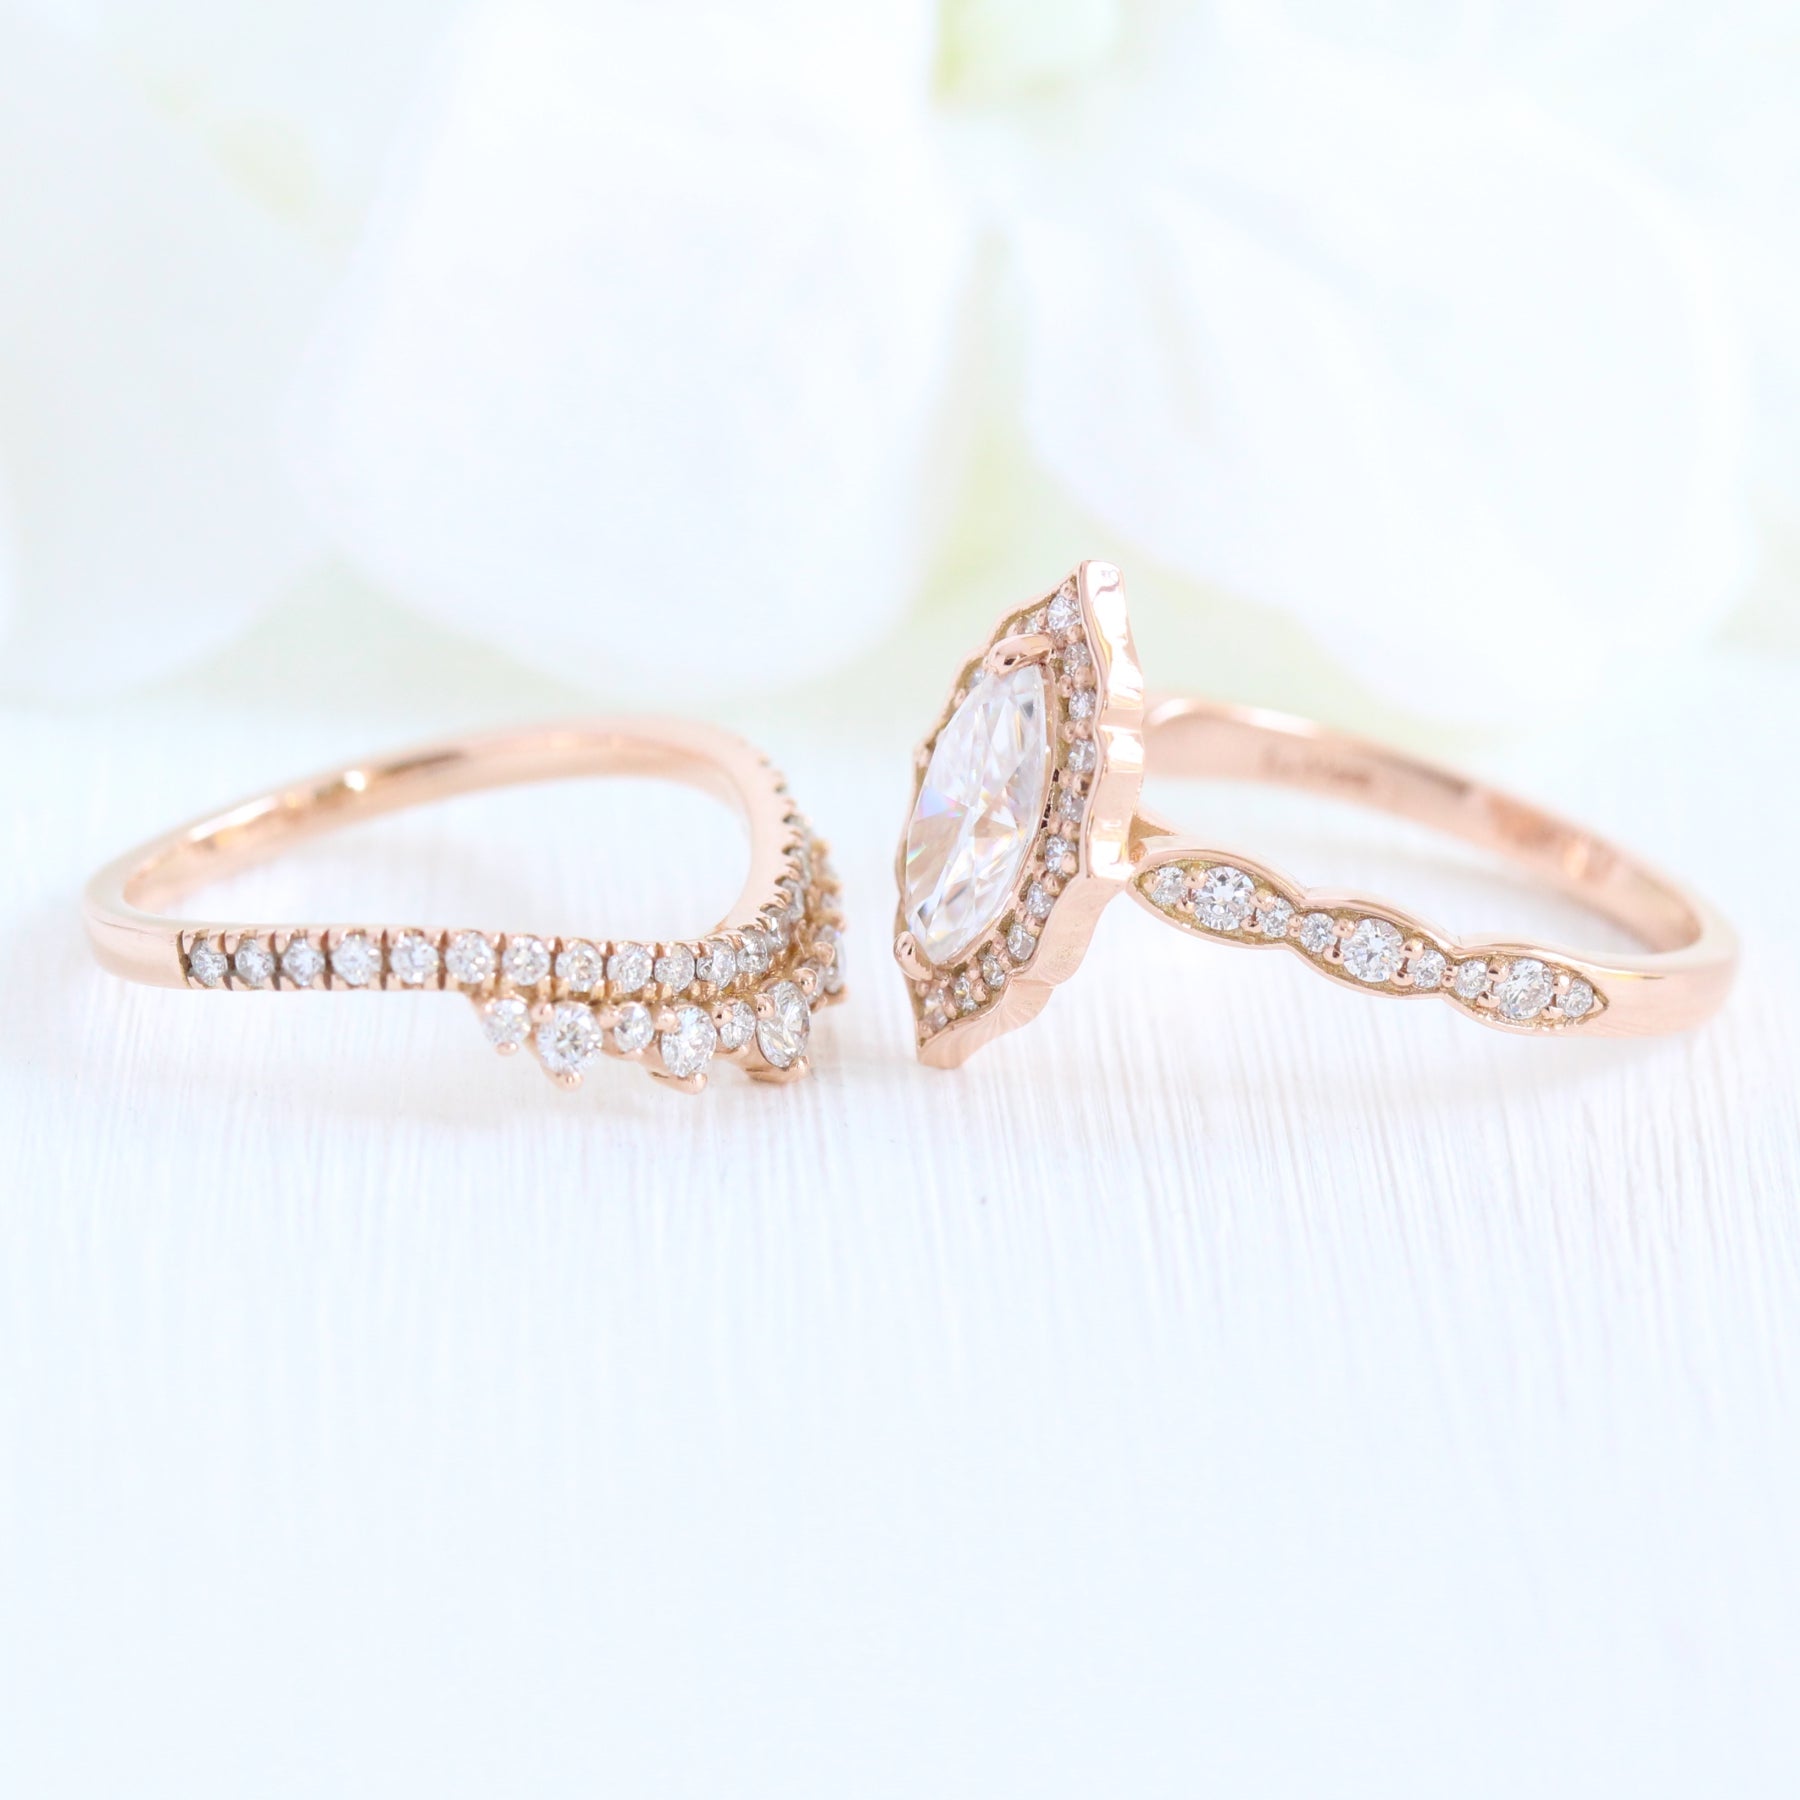 Halo diamond marquise ring rose gold curved crown diamond wedding ring bridal set by la more design jewelry